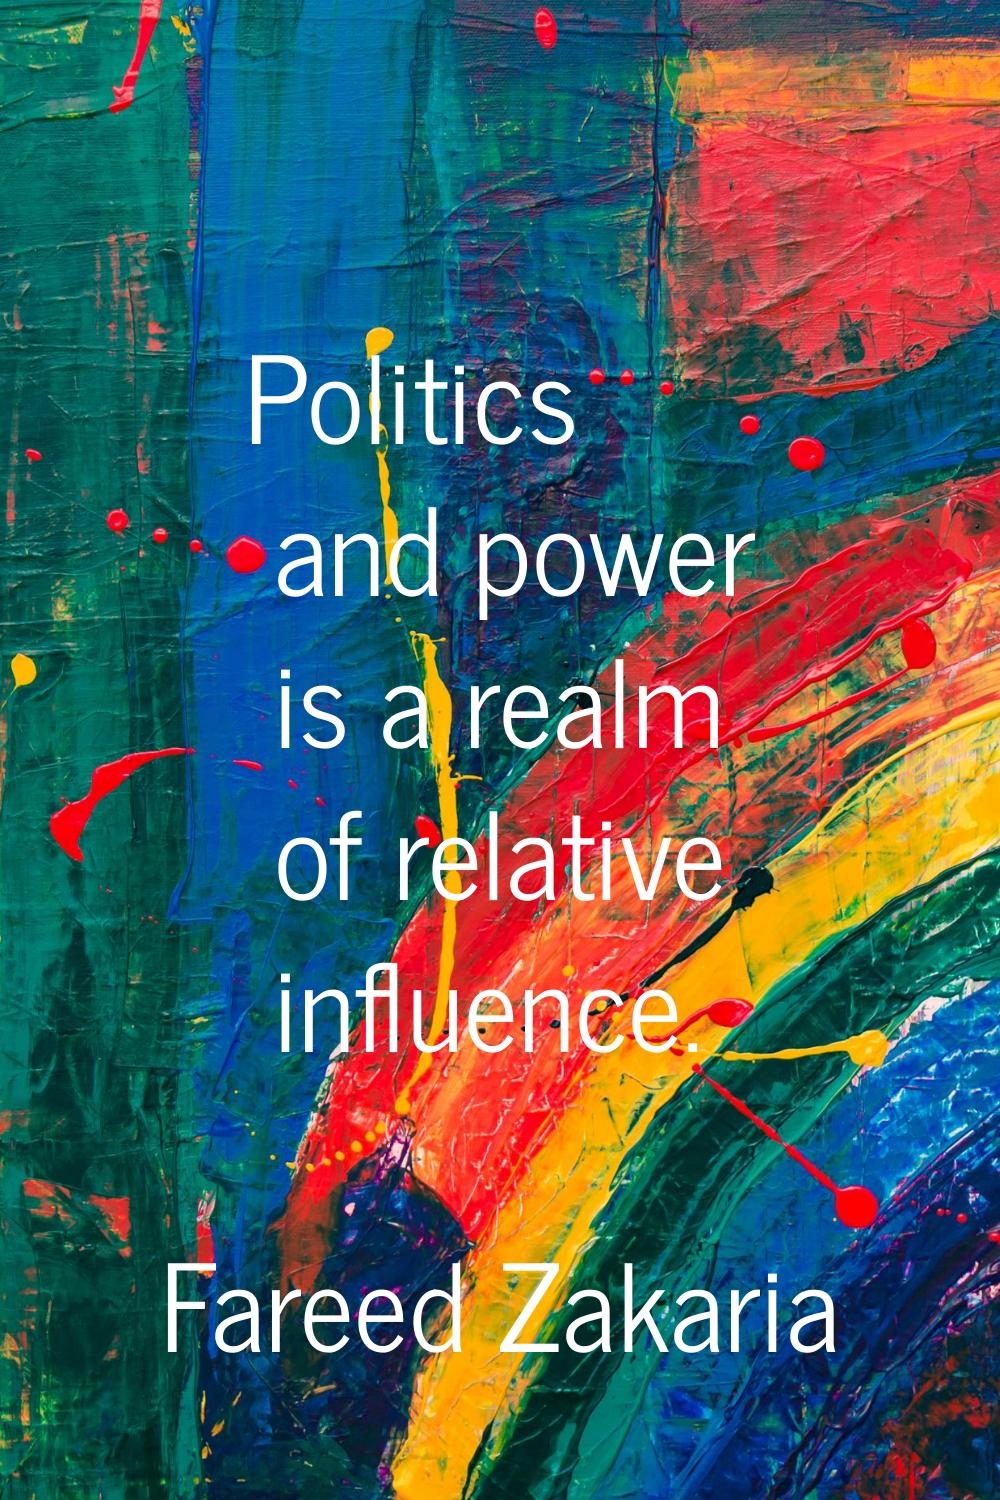 Politics and power is a realm of relative influence.